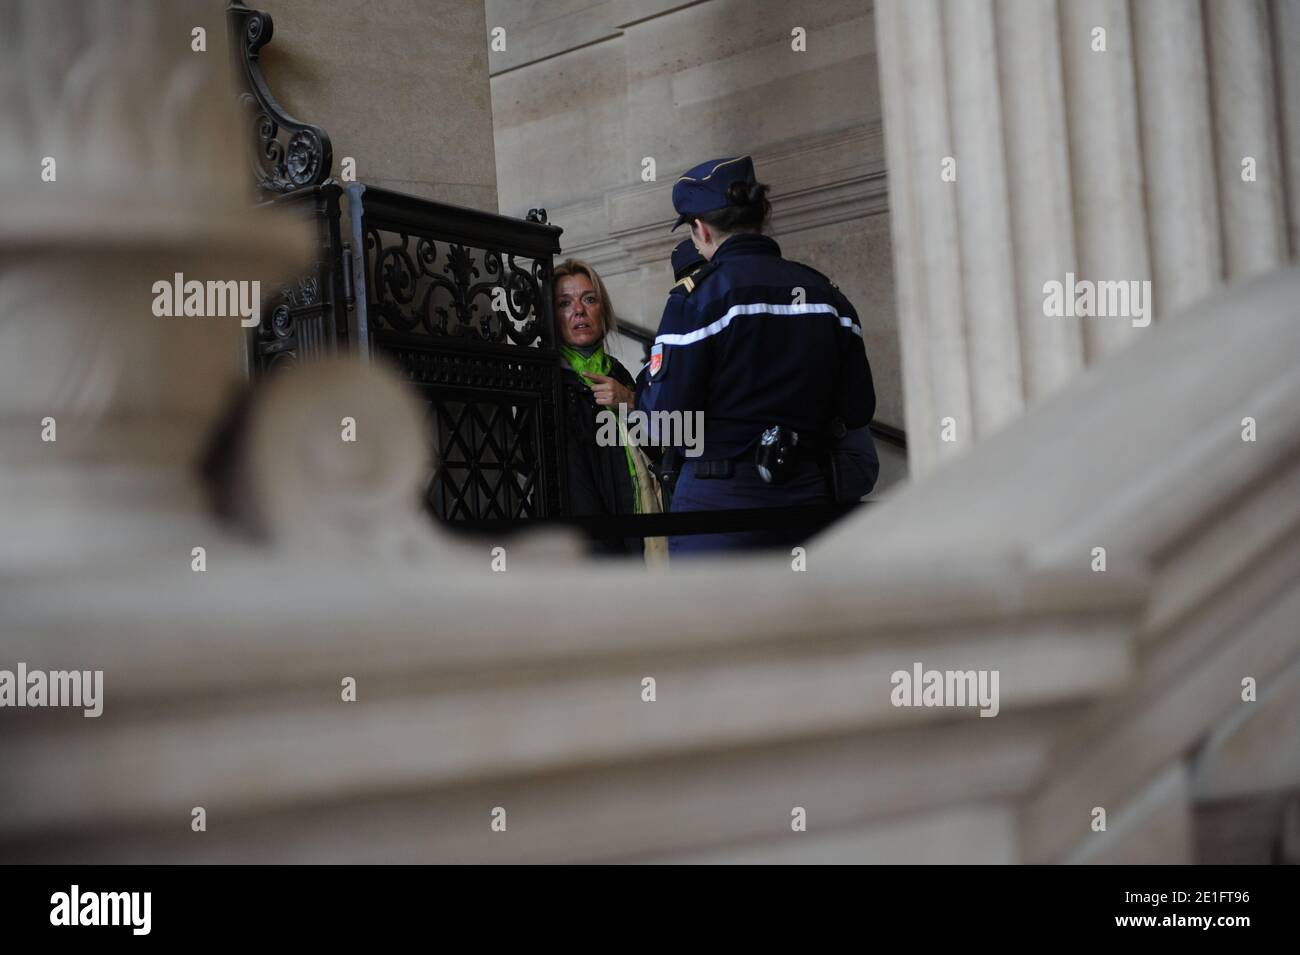 Diana Gunther (L), the daughter of German cardiologist Dieter Krombach at the Palais de Justice where she attended the second day of her father's trial for the murder of Kalinka Bamberski, in Paris, France on March 30, 2011. The French court today decided to continue the trial of the German doctor, who is accused of having raped and killed his then 14-year-old stepdaughter, Kalinka Bamberski, in the summer of 1982 while she was holidaying with her mother at Krombach's home at Lake Constance, southern Germany. A court in Germany ruled that Krombach could not be held responsible for the death, b Stock Photo